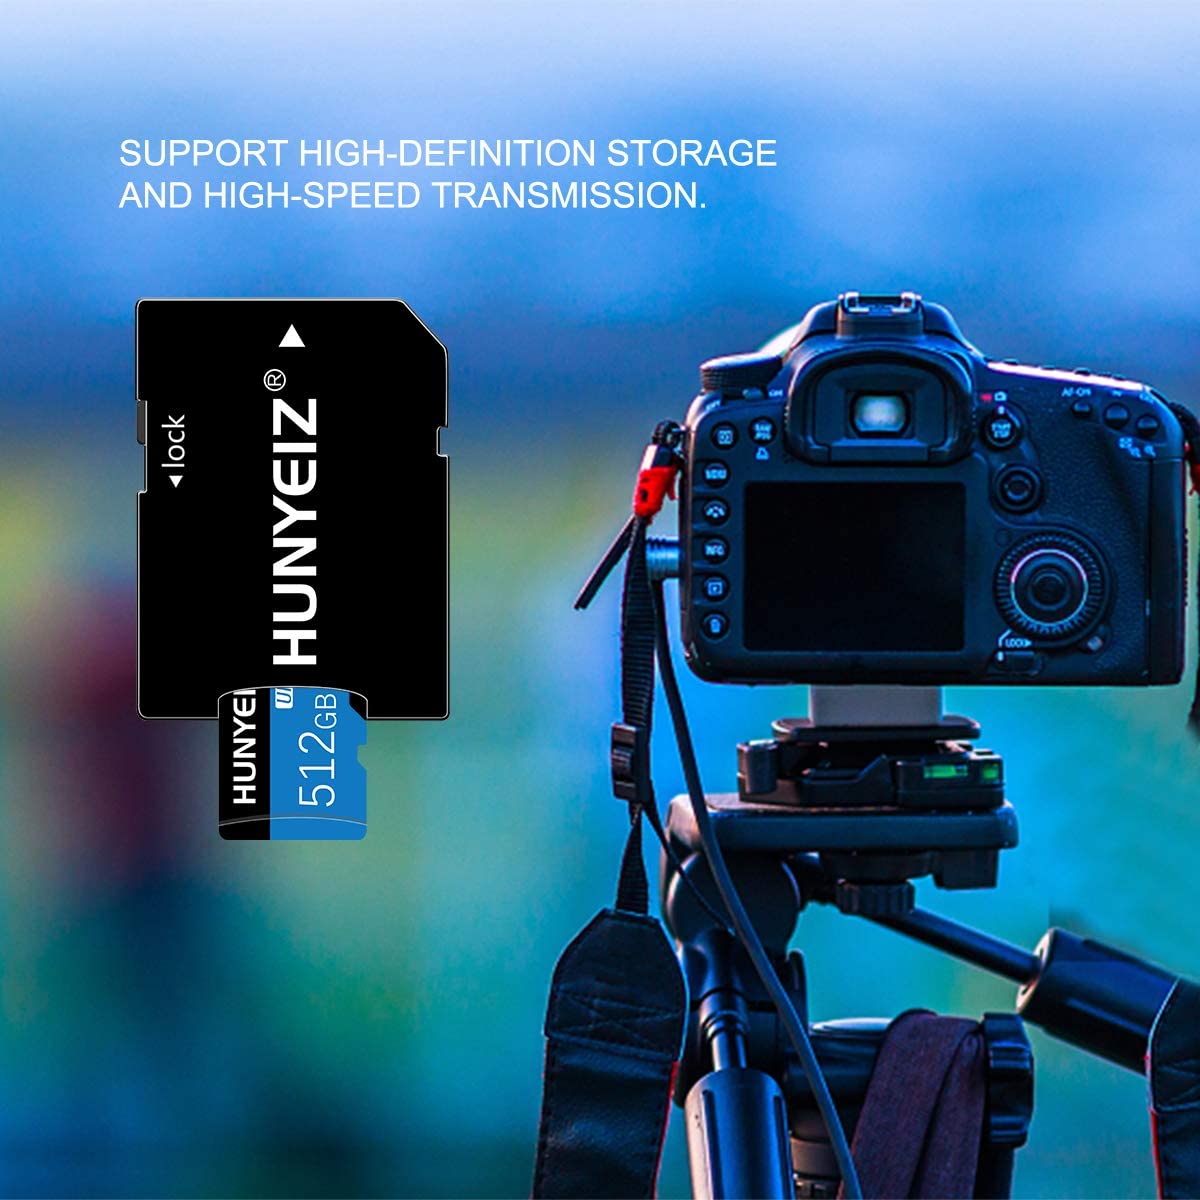 512GB Microsdxc High Speed Transfer Micro SD Card with Adapter for Dash Cams, Action Camera, Surveillance & Security Cams